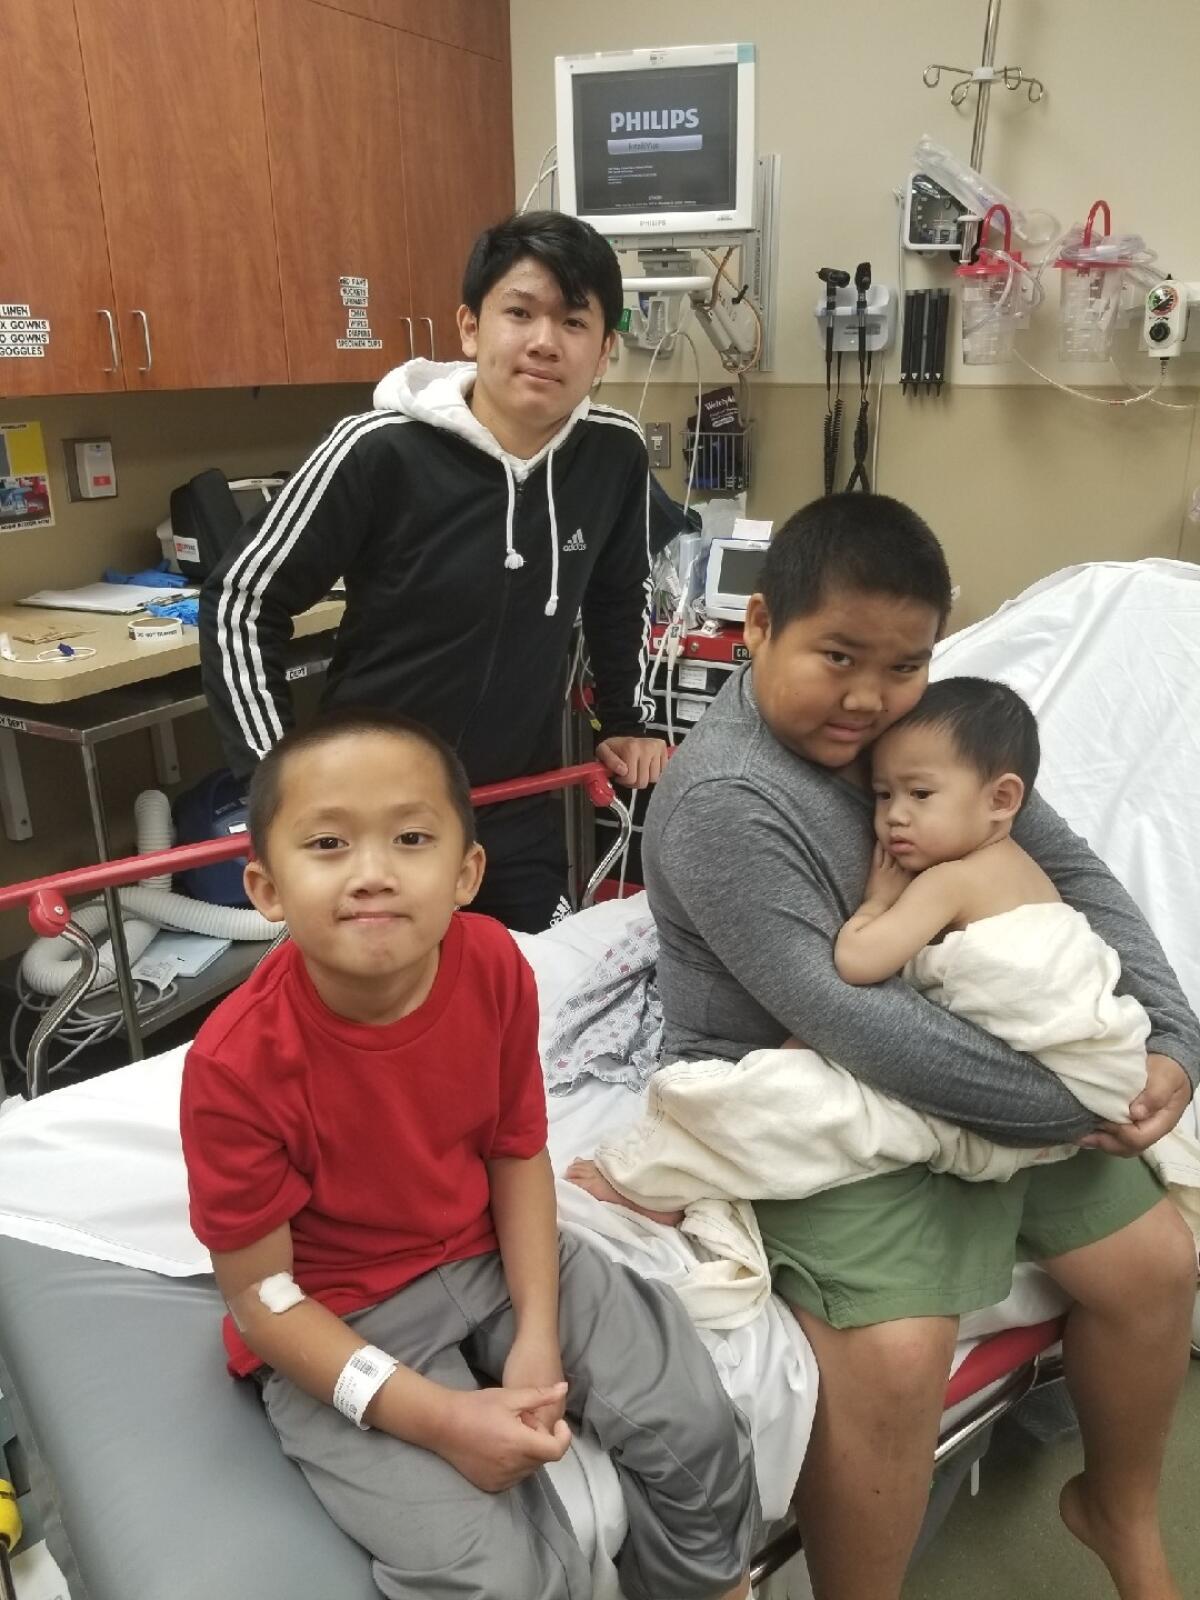 The Phommathep boys of Rancho Tehama: Jake, 6, front, was shot in the foot; John Jr., 10, who was shot in the calf, holds Nikos, 2, who was cut by glass; Tristan, 14, standing, escaped injury. Their mother was shot four times and survived.